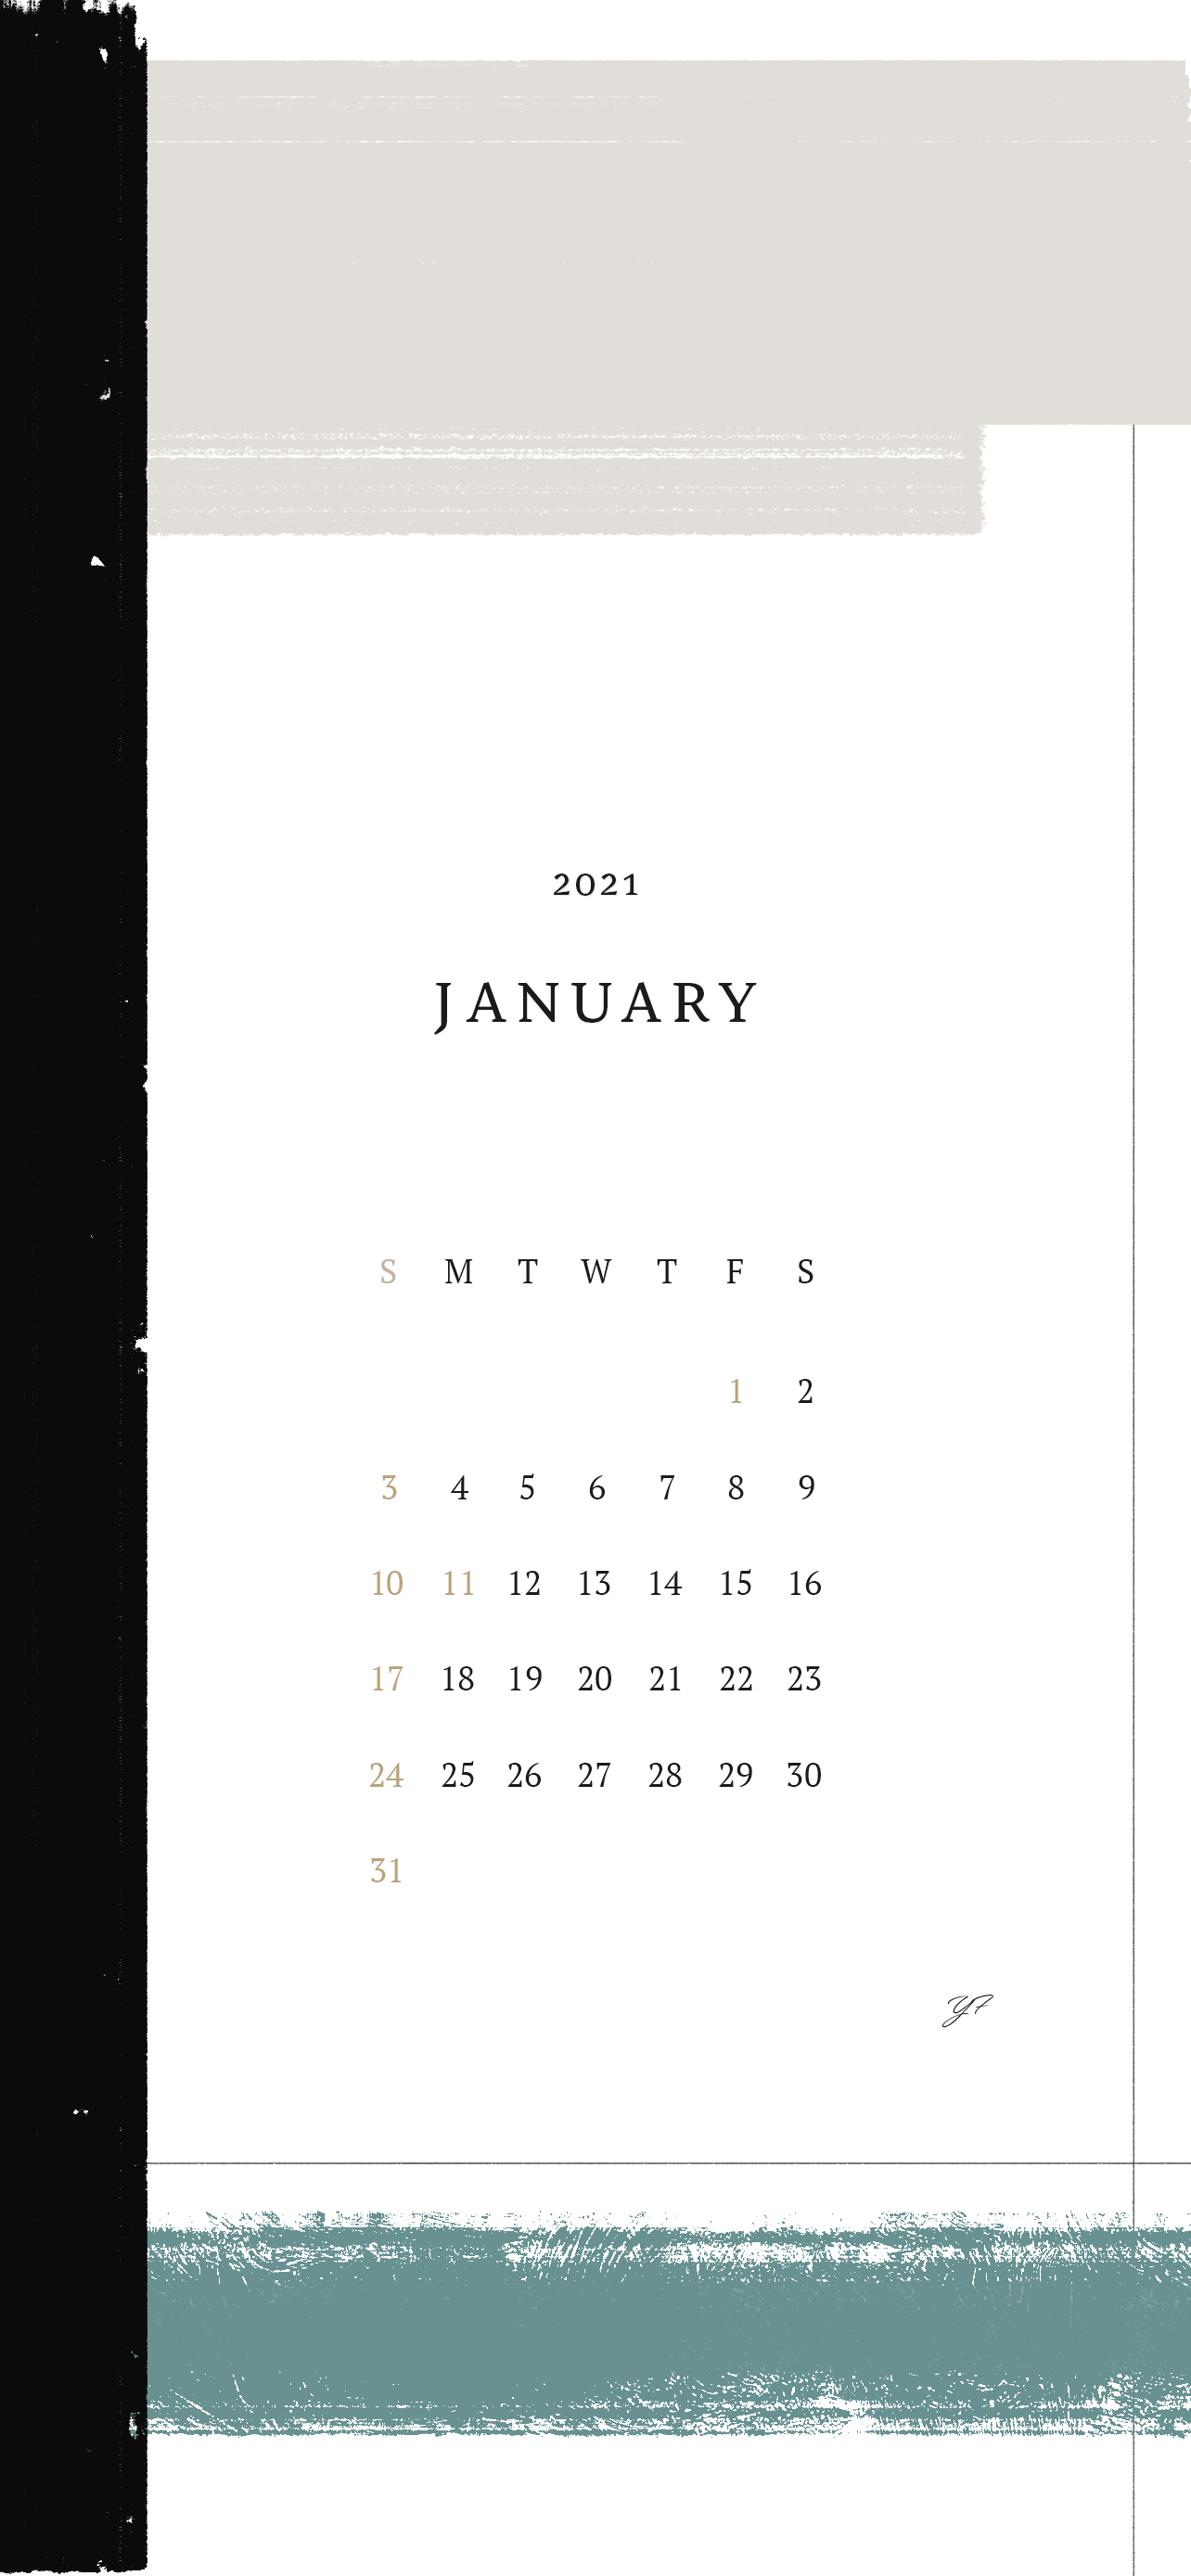 January 21 Calendar Wallpaper For The Iphone Mulchcolor Ver Designed By Yf